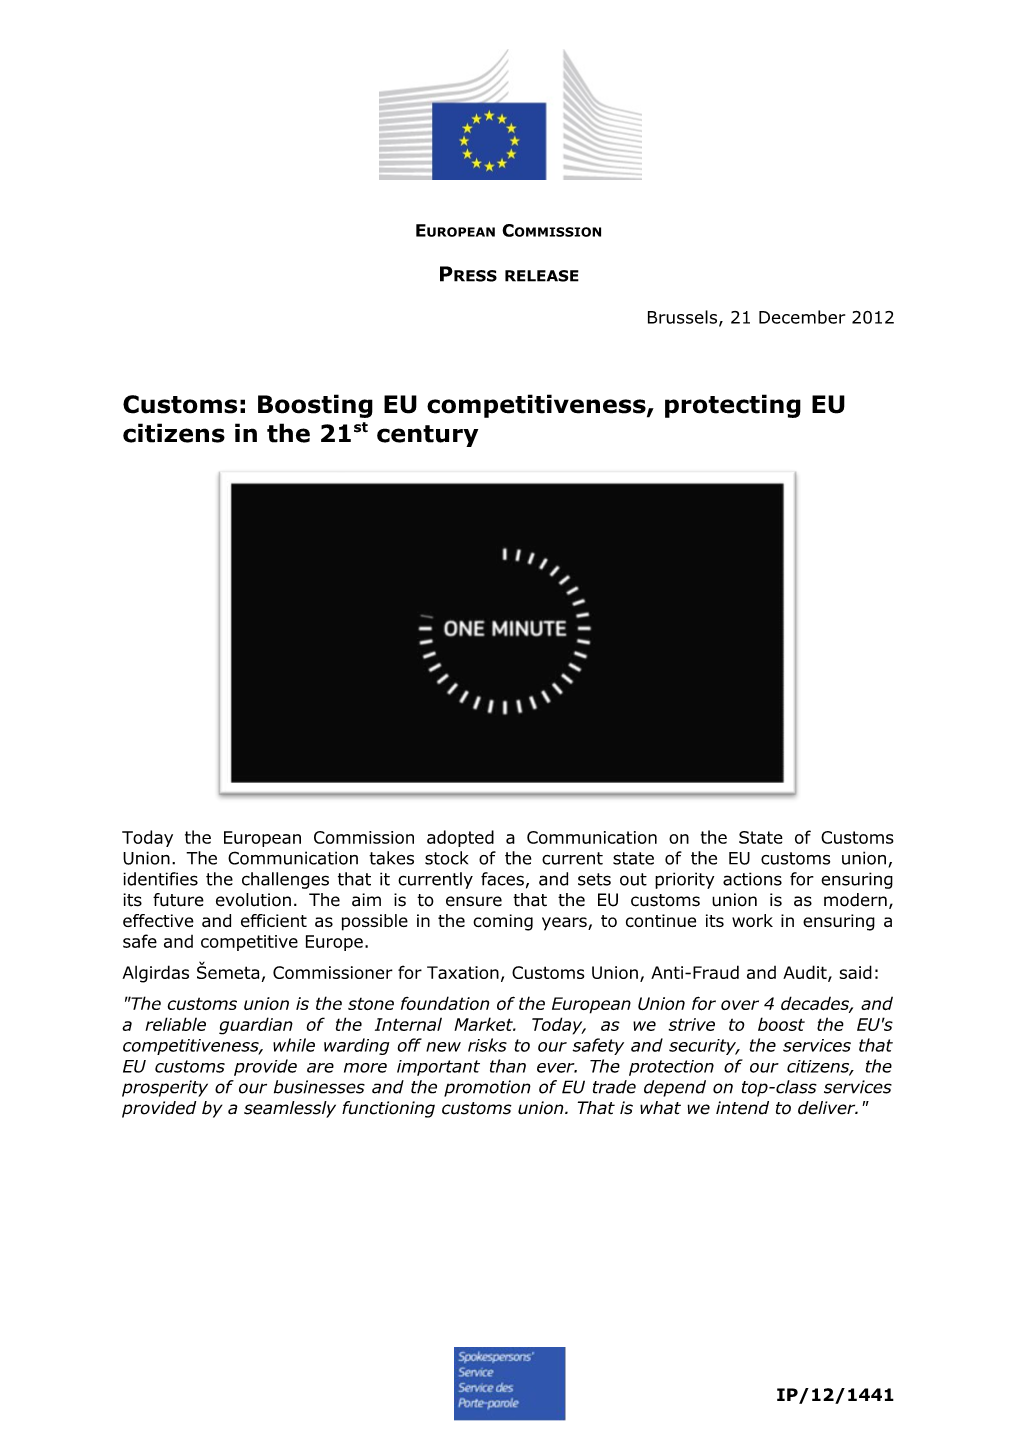 Customs: Boosting EU Competitiveness, Protecting EU Citizens in the 21St Century